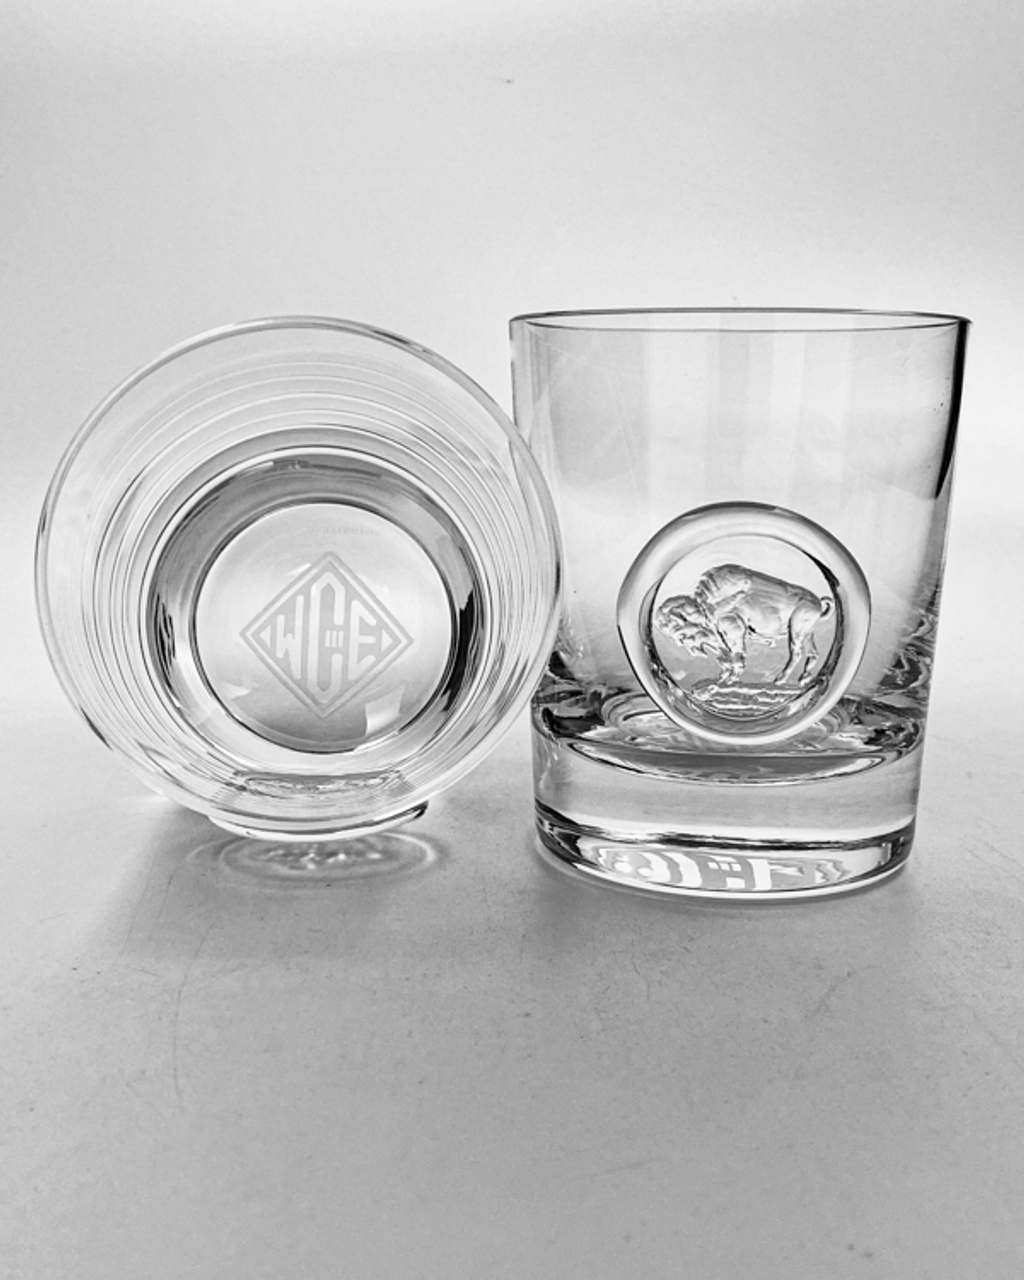 DST35830-Wholesale-Promotional-10Oz-Stainless-Steel-Whiskey-Glass-With-Custom-Imprint